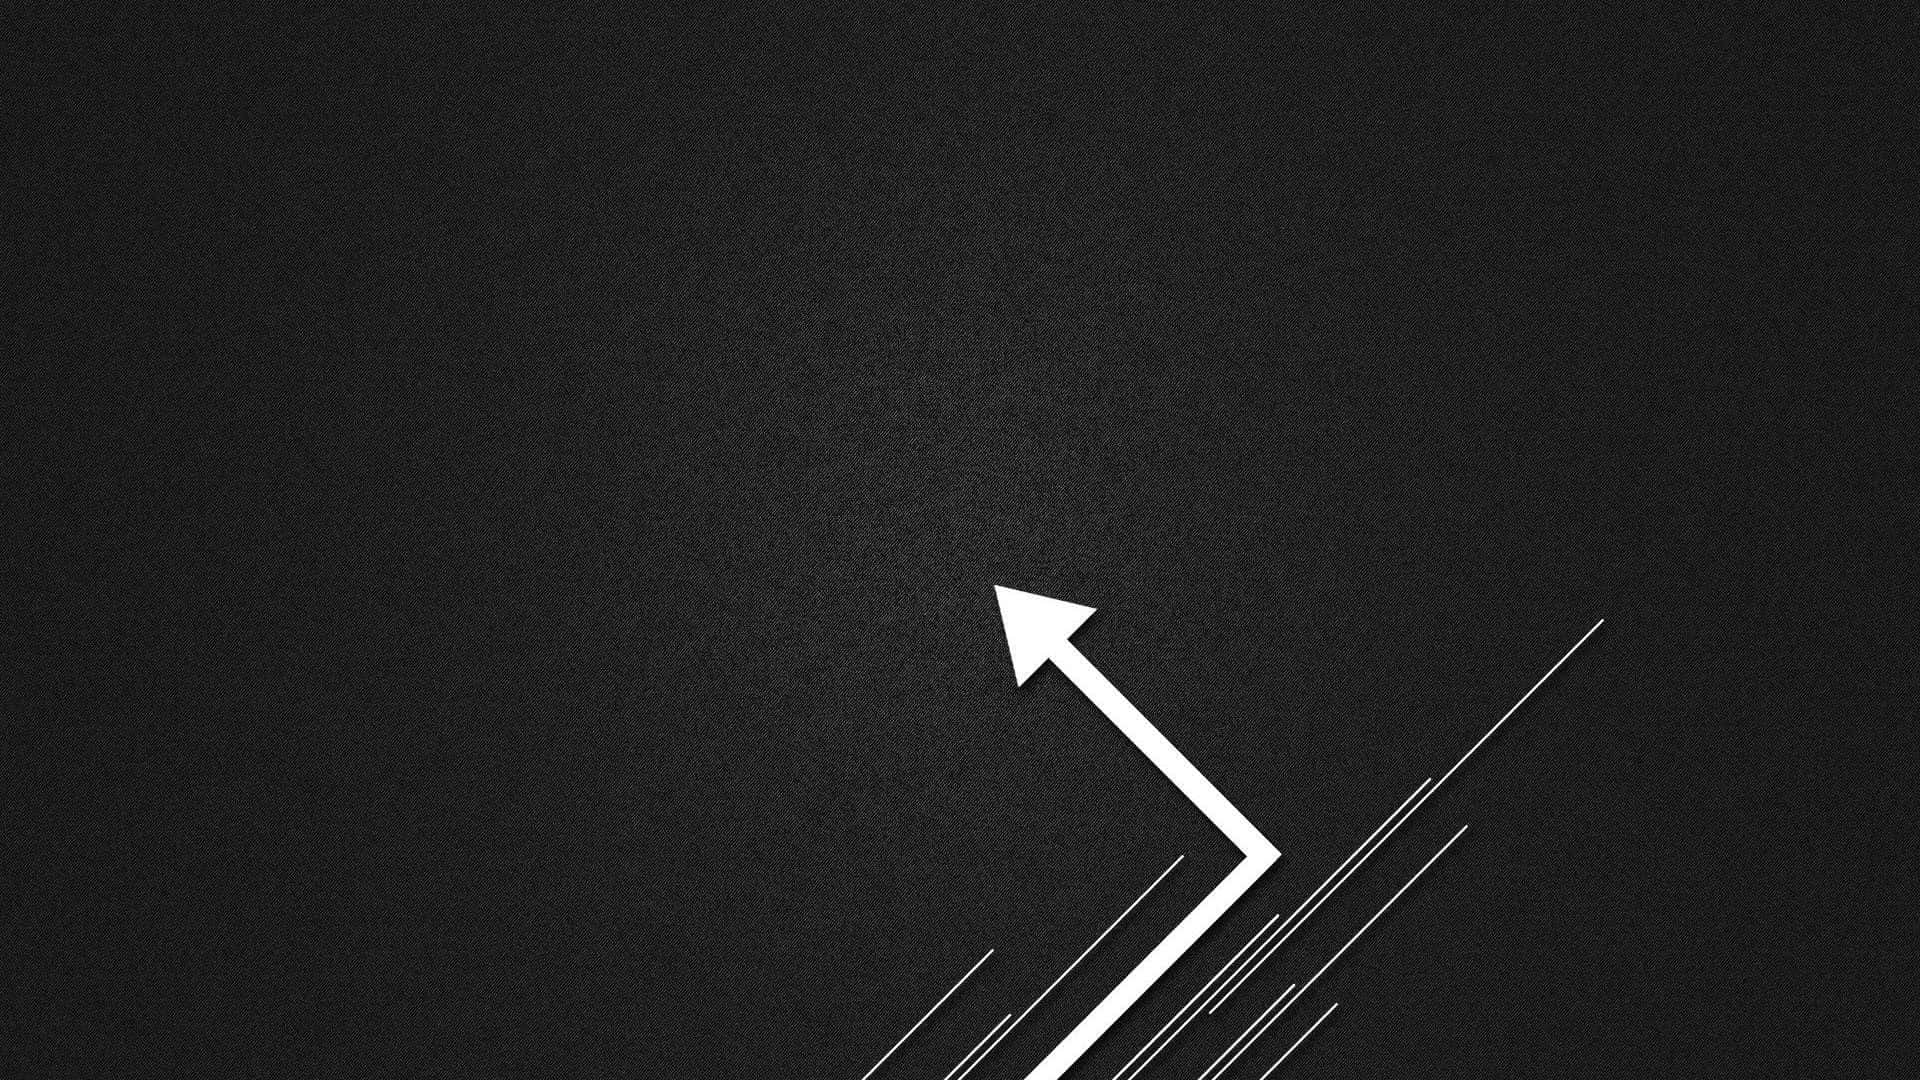 Arrow Pointing Up On A Black Background